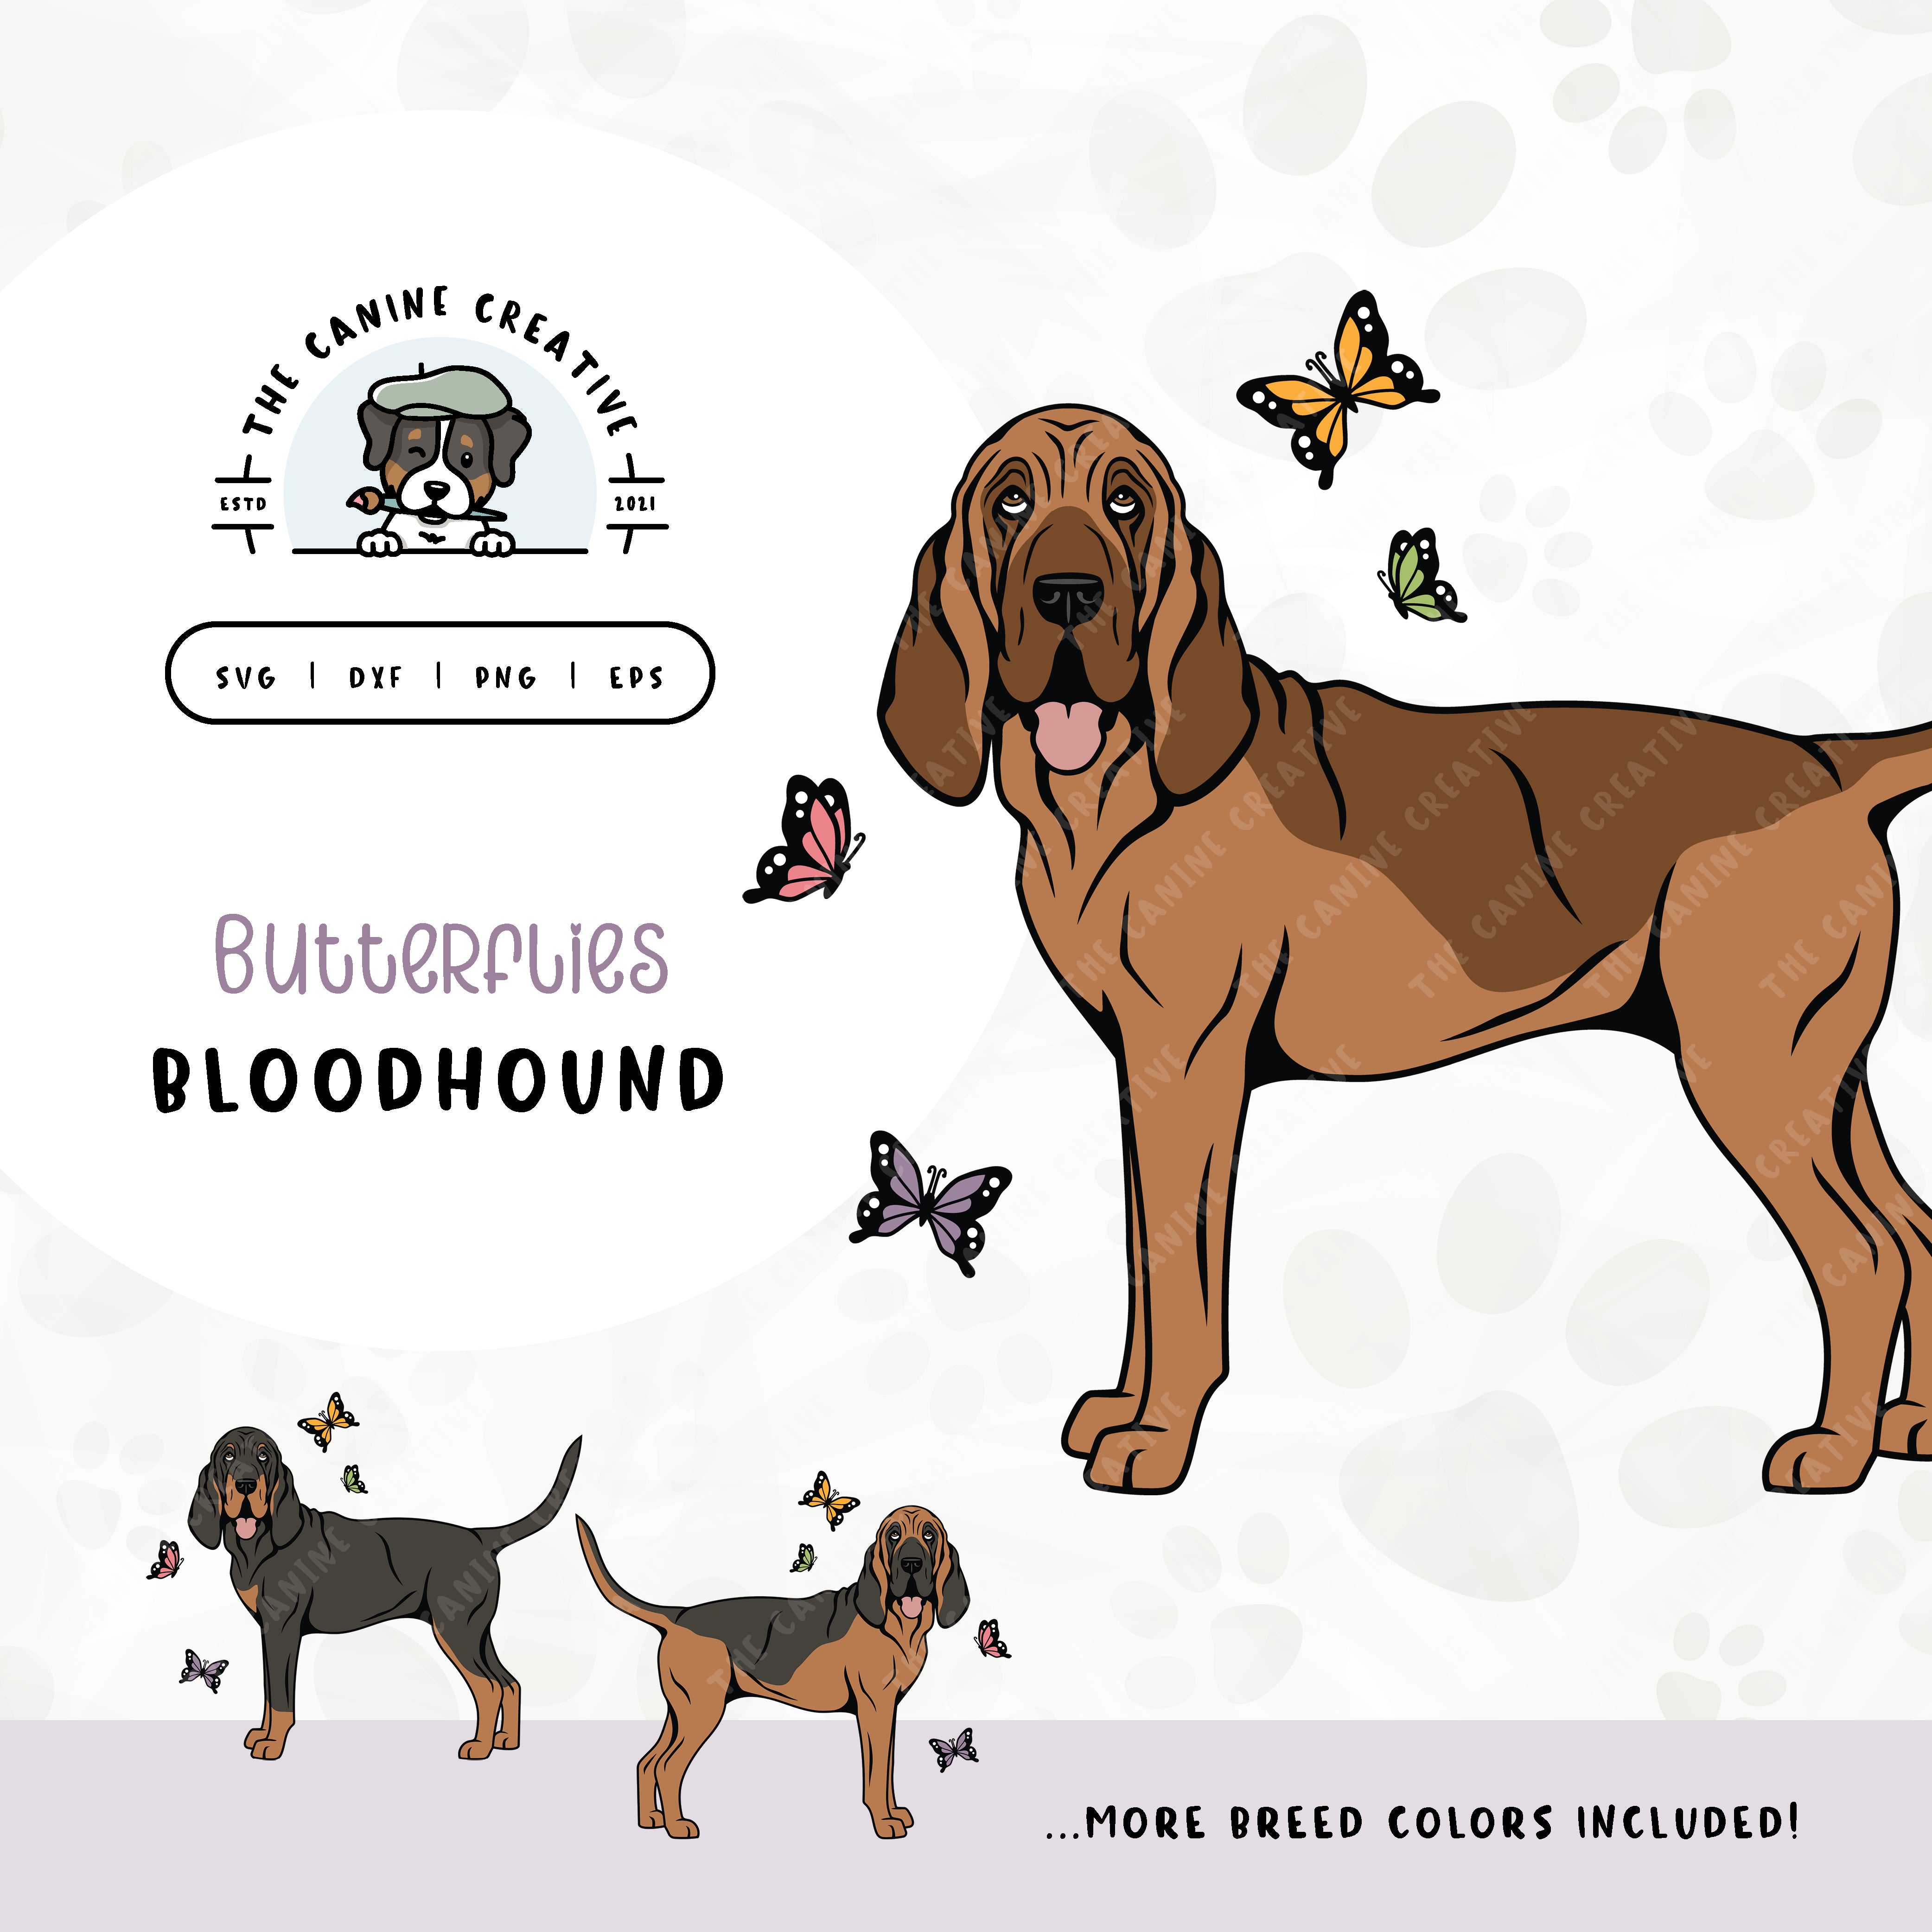 This springtime illustration features a Bloodhound among colorful butterflies. File formats include: SVG, DXF, PNG, and EPS.